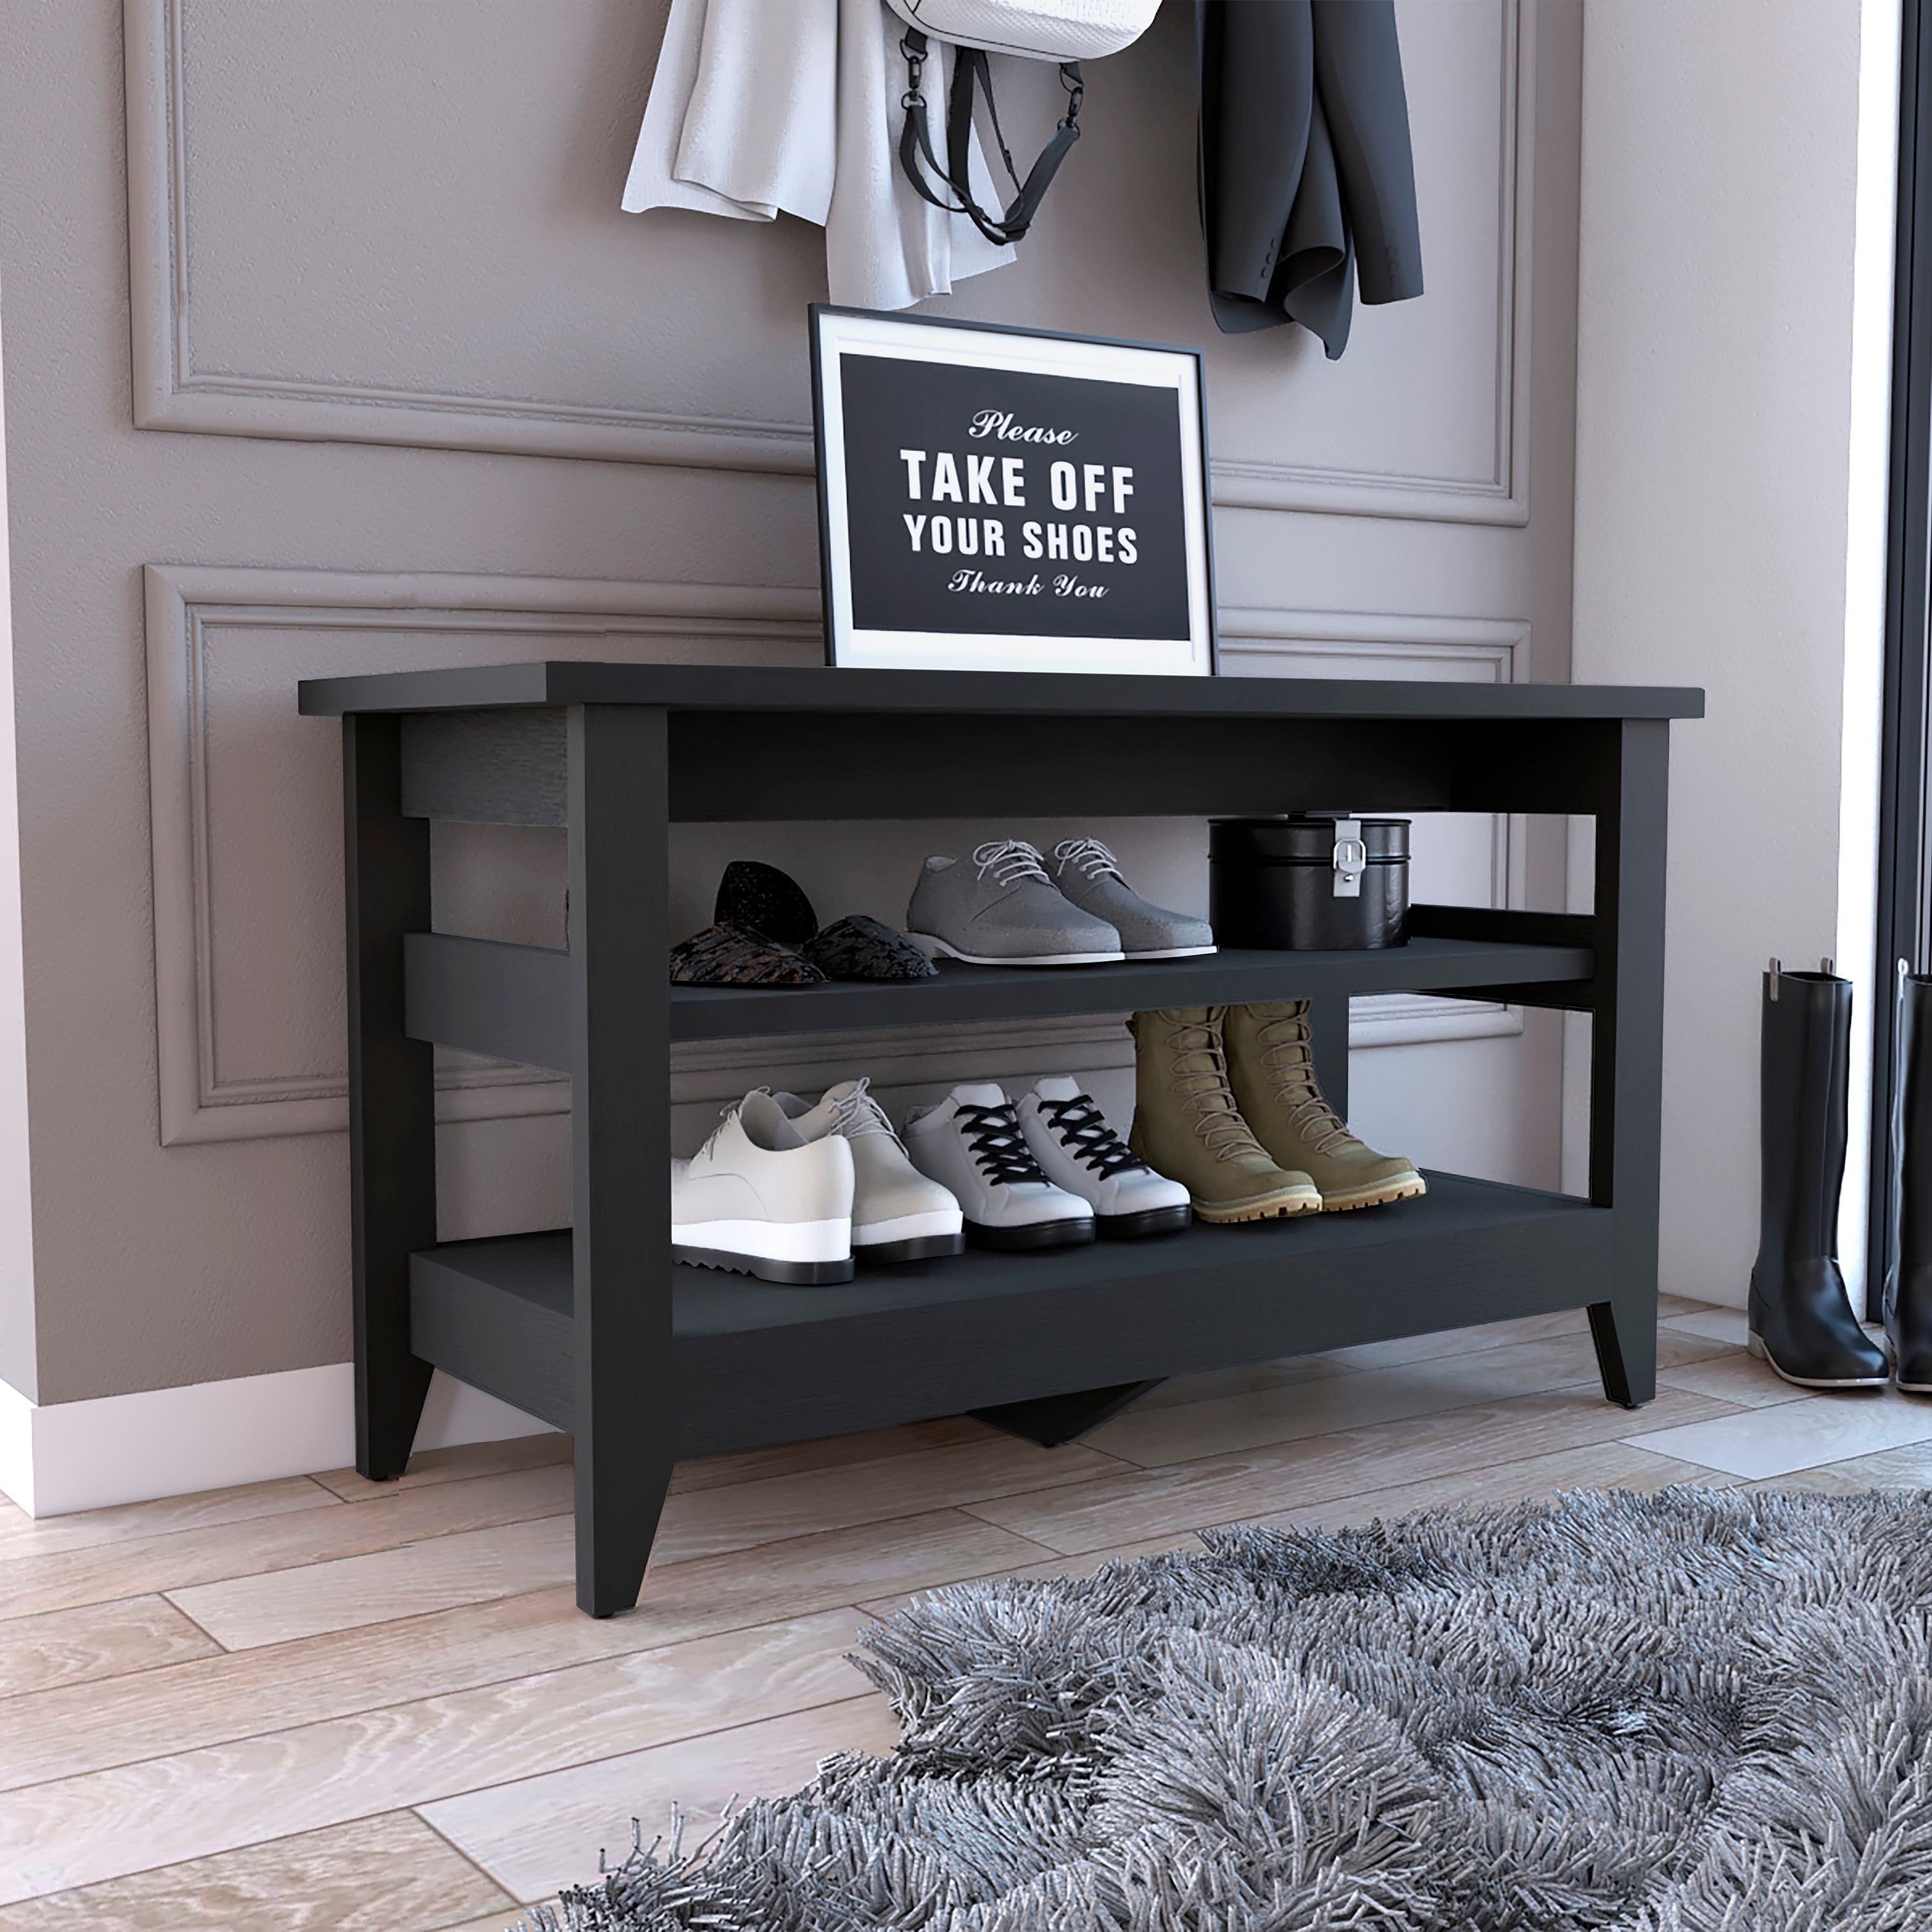 https://ak1.ostkcdn.com/images/products/is/images/direct/6592431203a00984be8603d7738d78f7200141fc/2-Shelf-Rectangle-Storage-Bench-Shoe-Storage-Organizer-Display-Shelf-for-Entryway-Bench.jpg